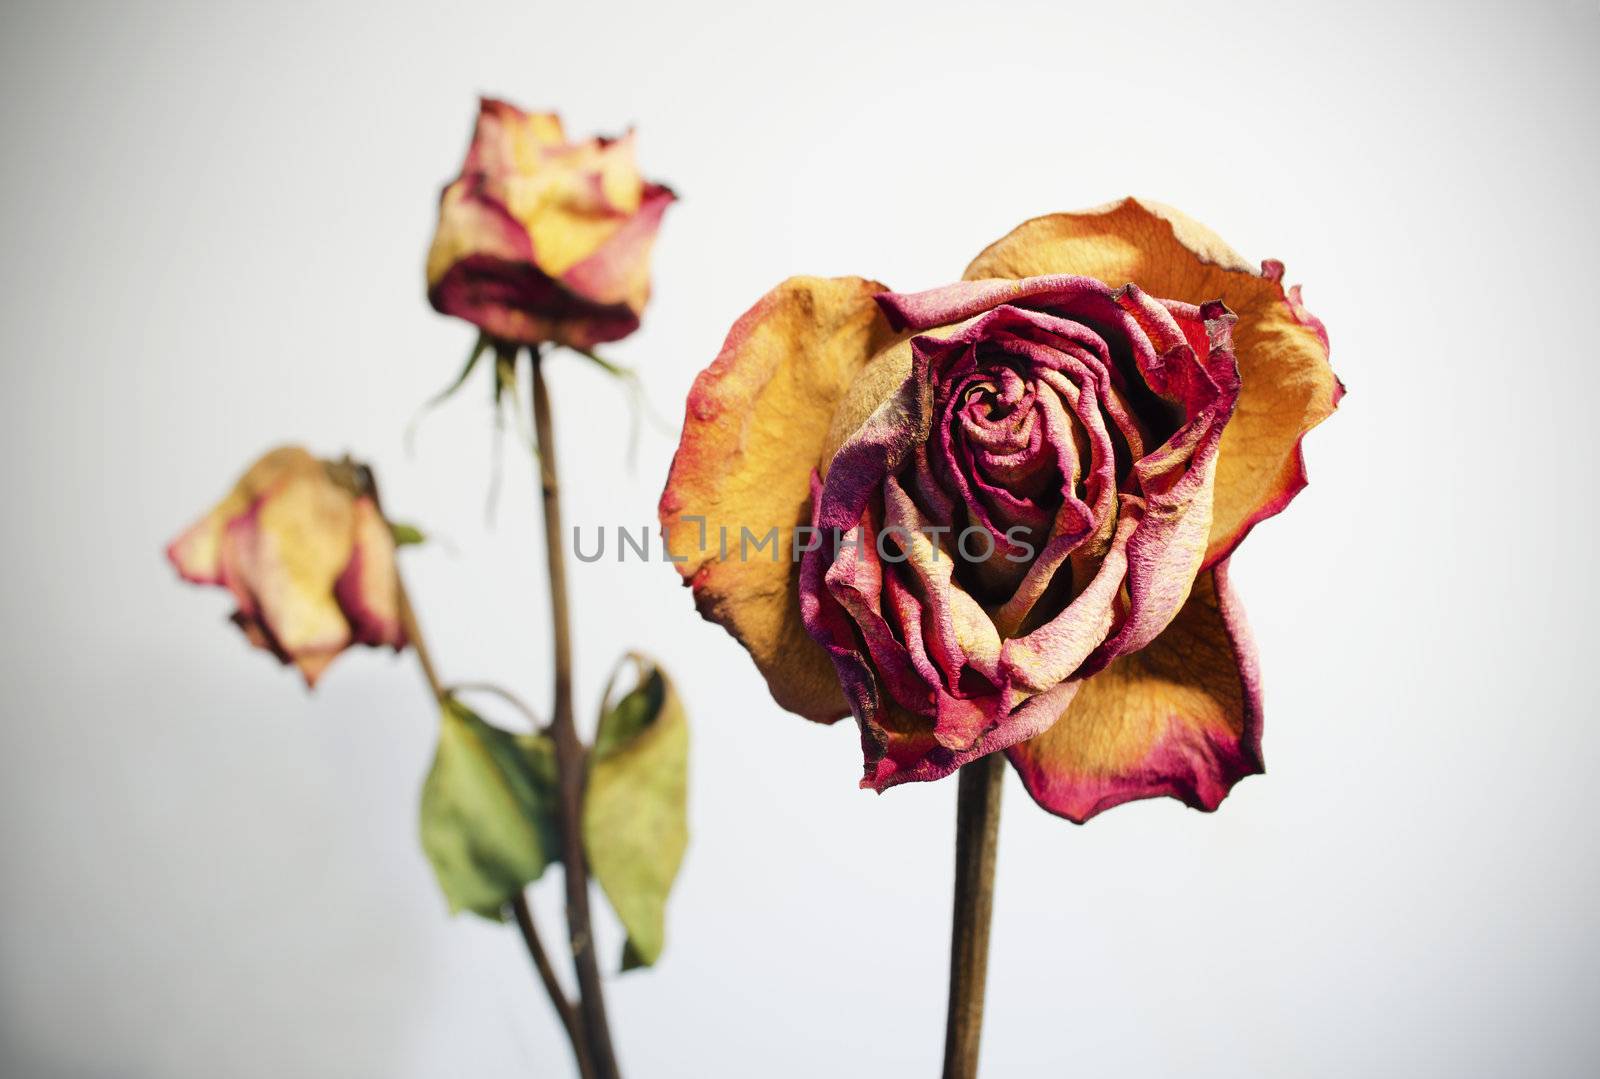 Withered rose on white background by nprause